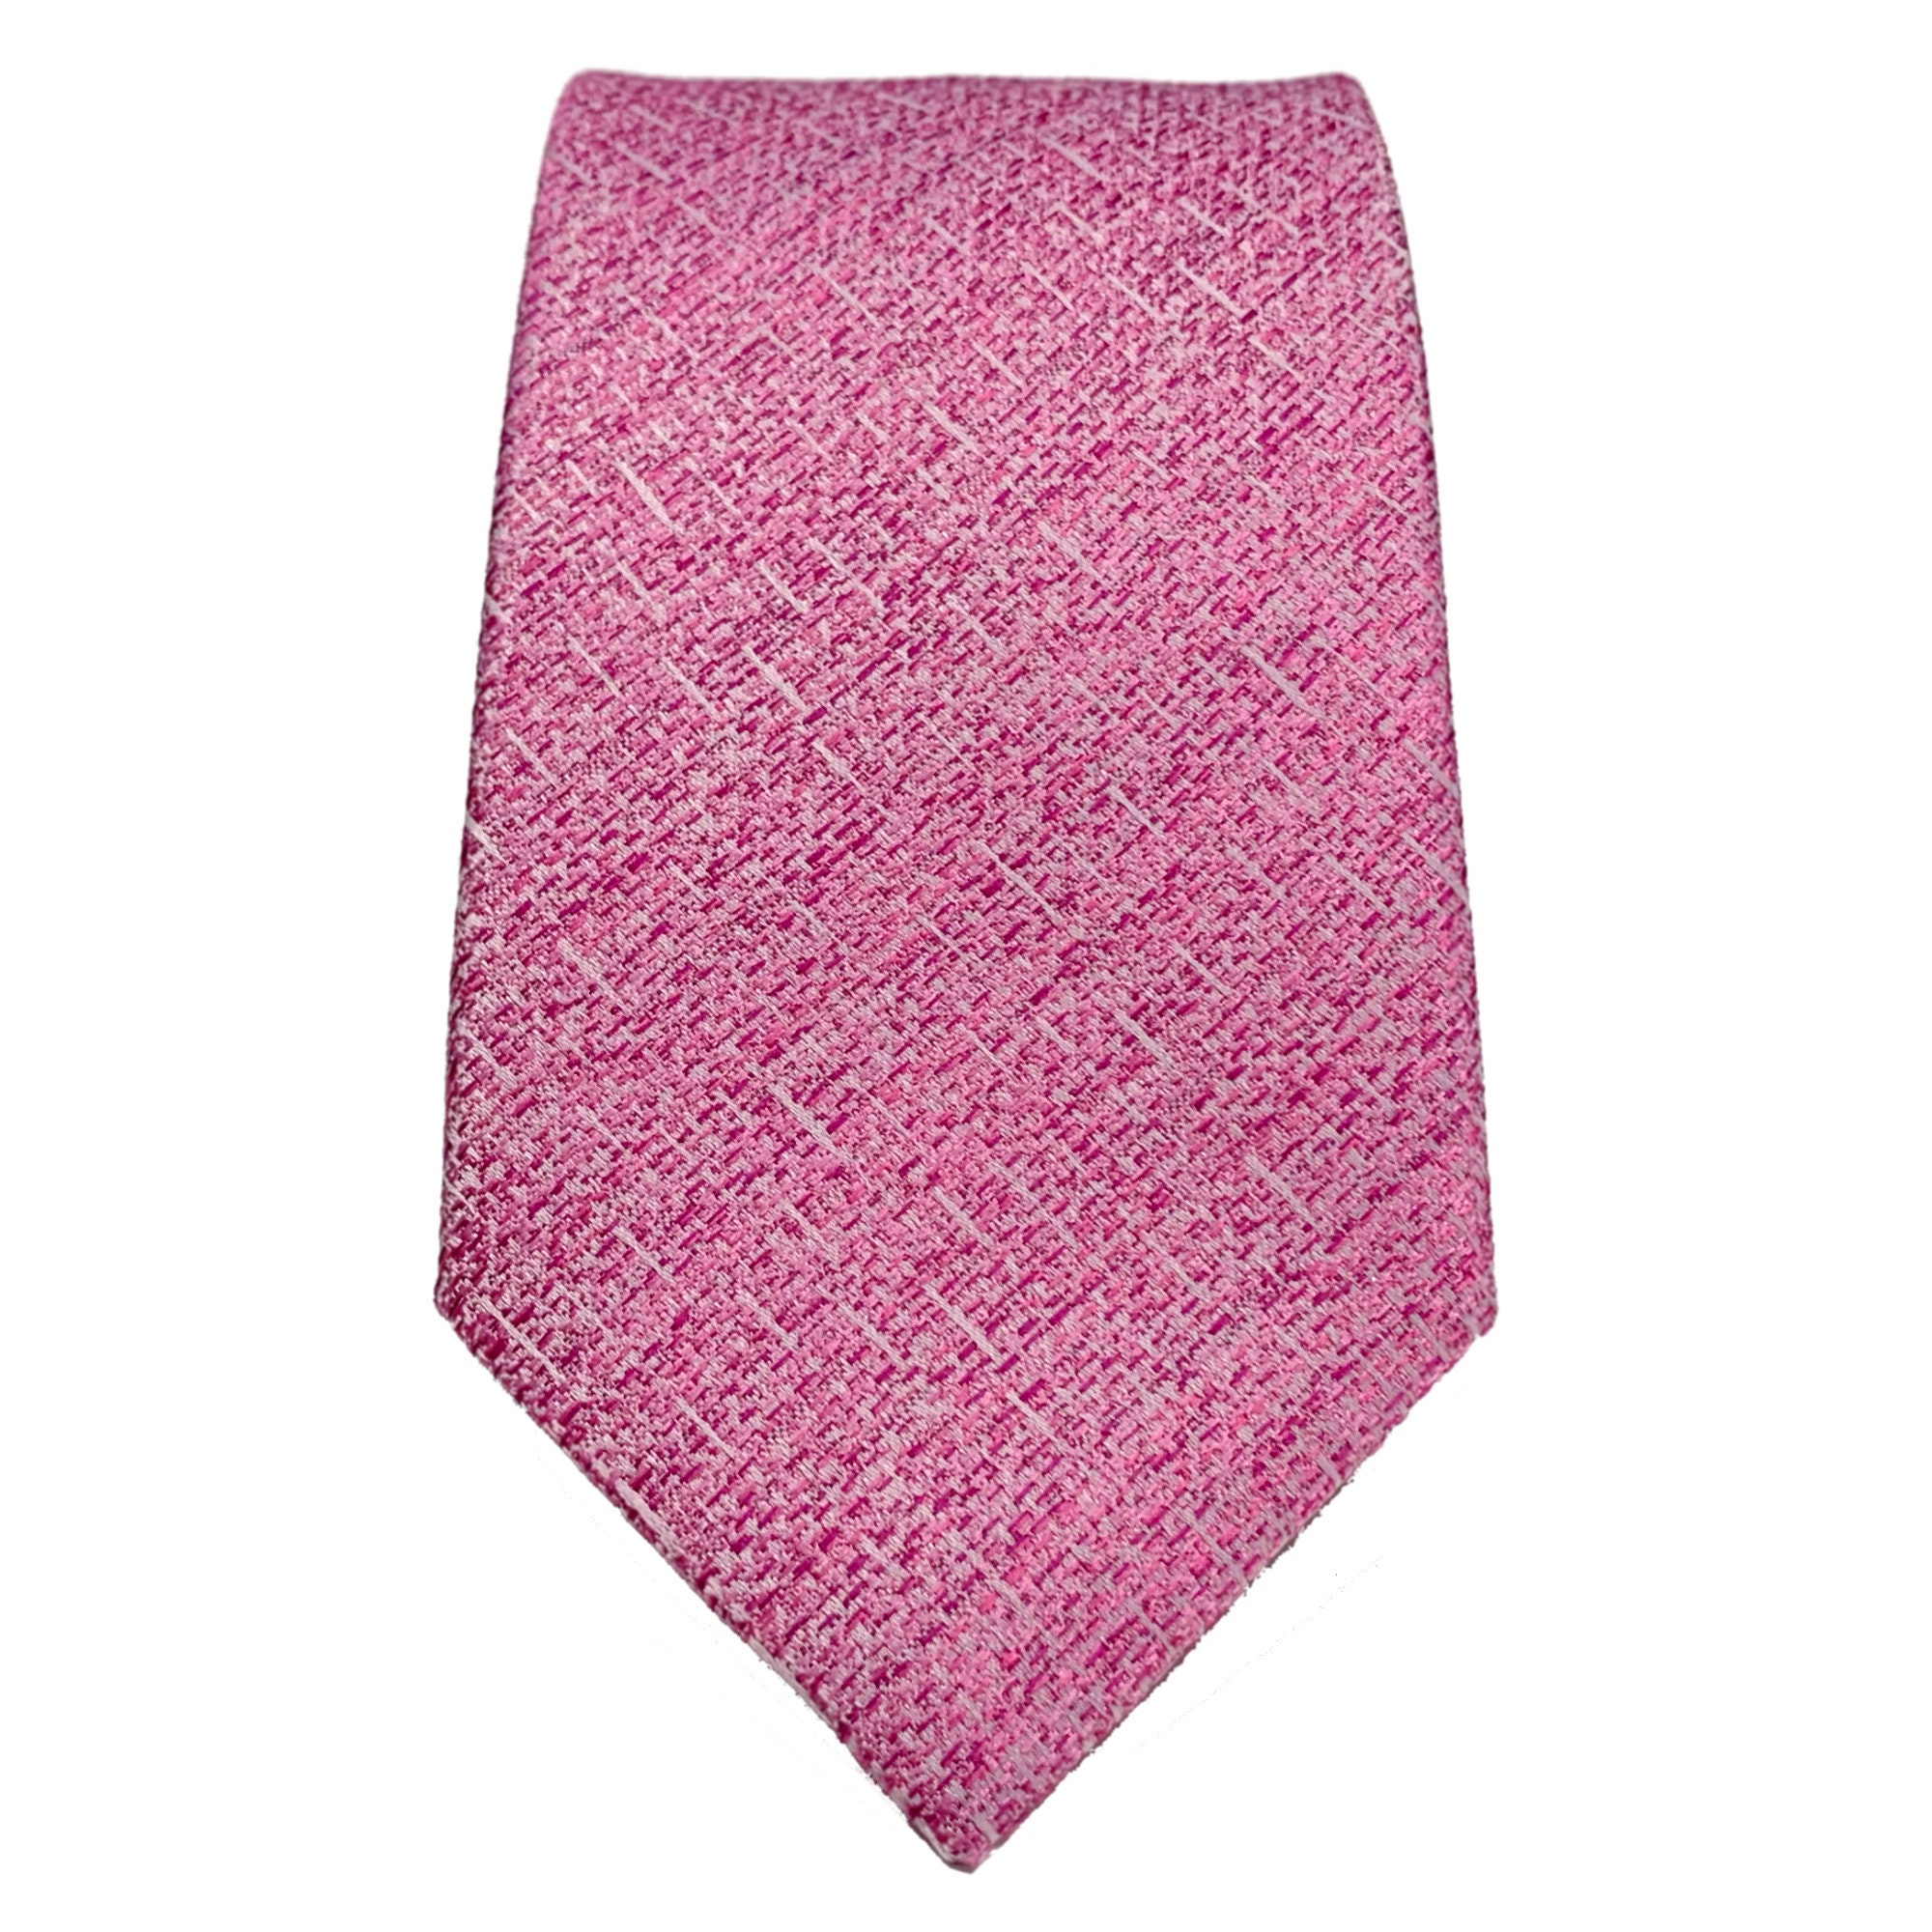 Pink, White and Purple Mixed Striped Tie 3.15 8cm - Etsy